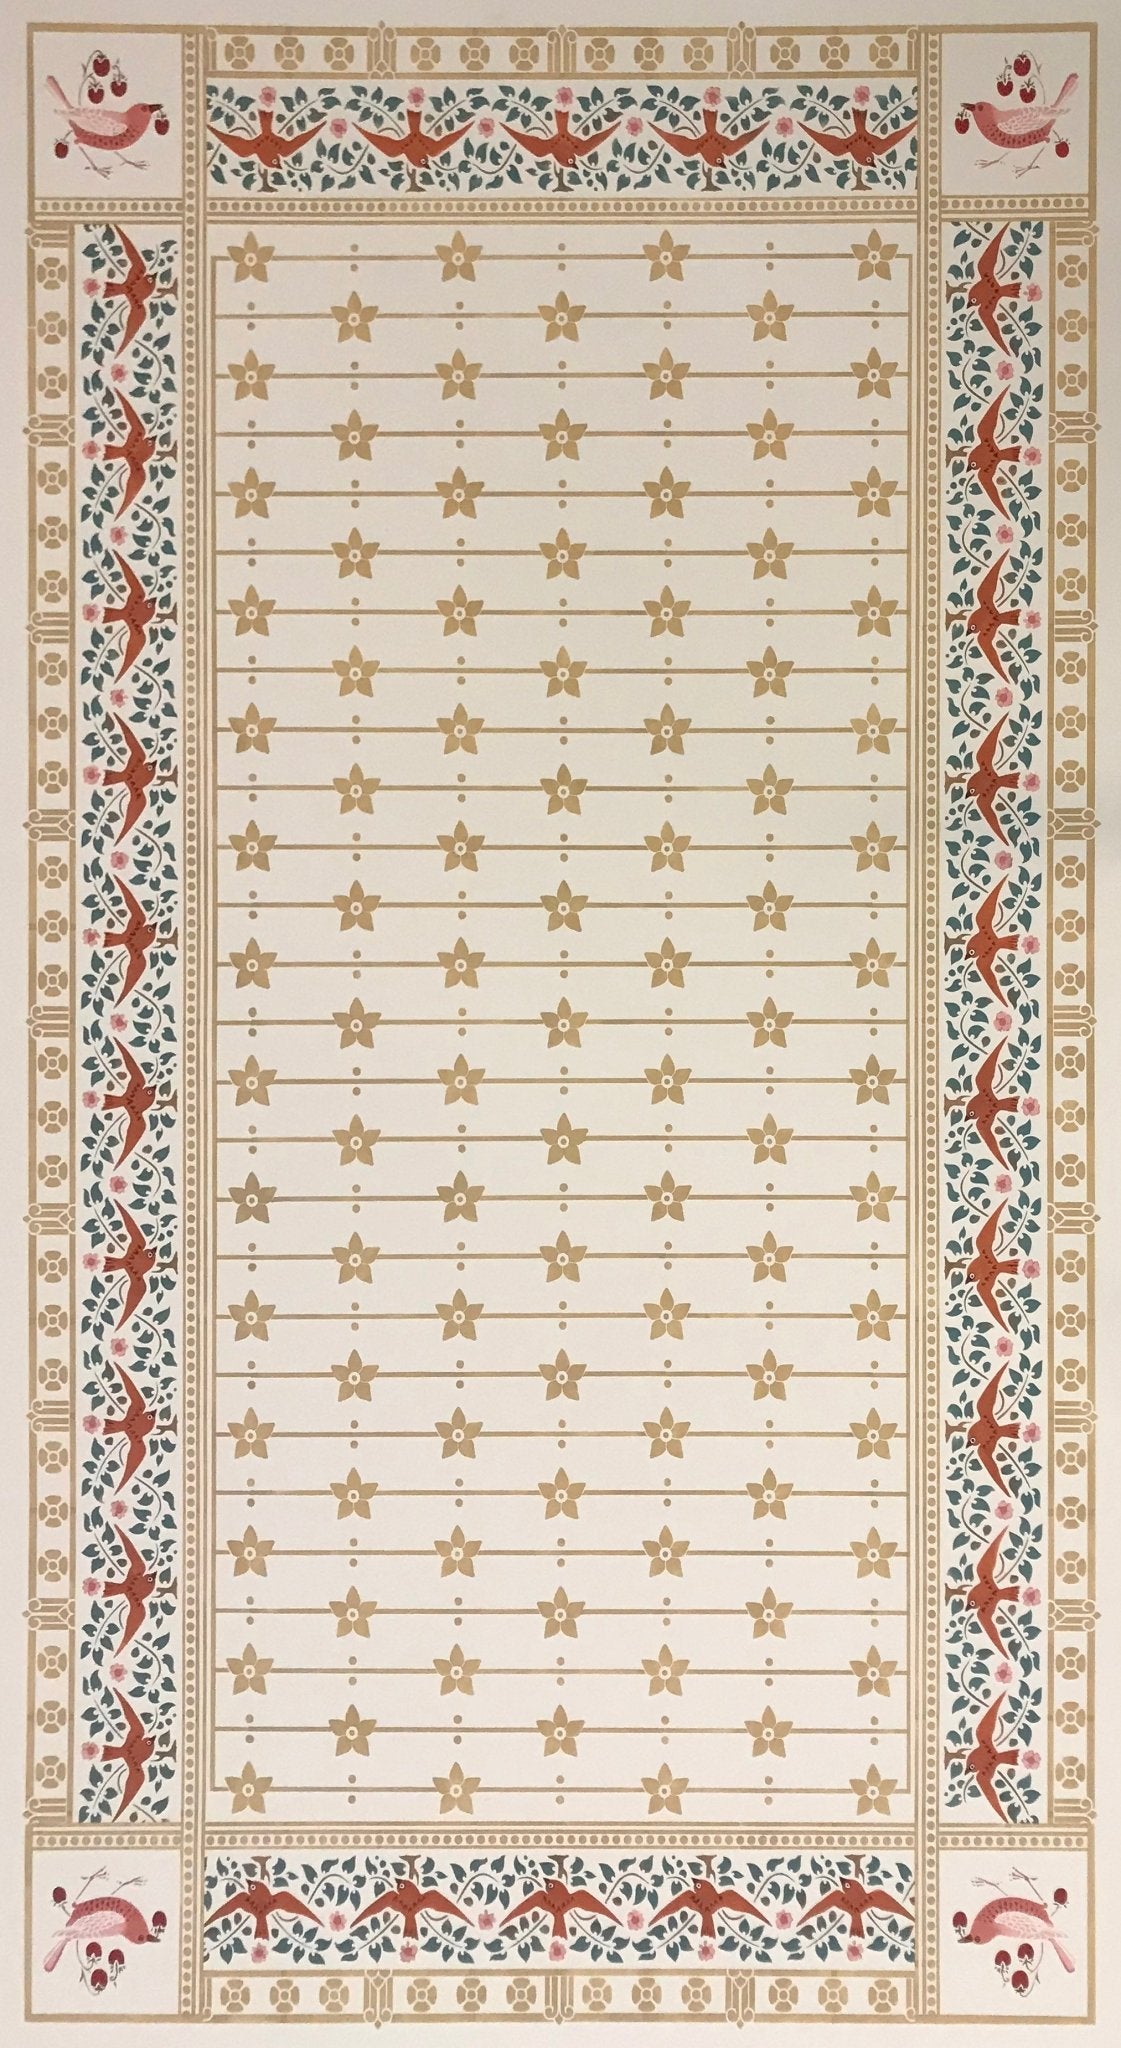 The full image of the StarFlower #6 Floorcloth which combines the work of Christopher Dresser and William Morris, both iconic design contemporaries of the late 1800s.  